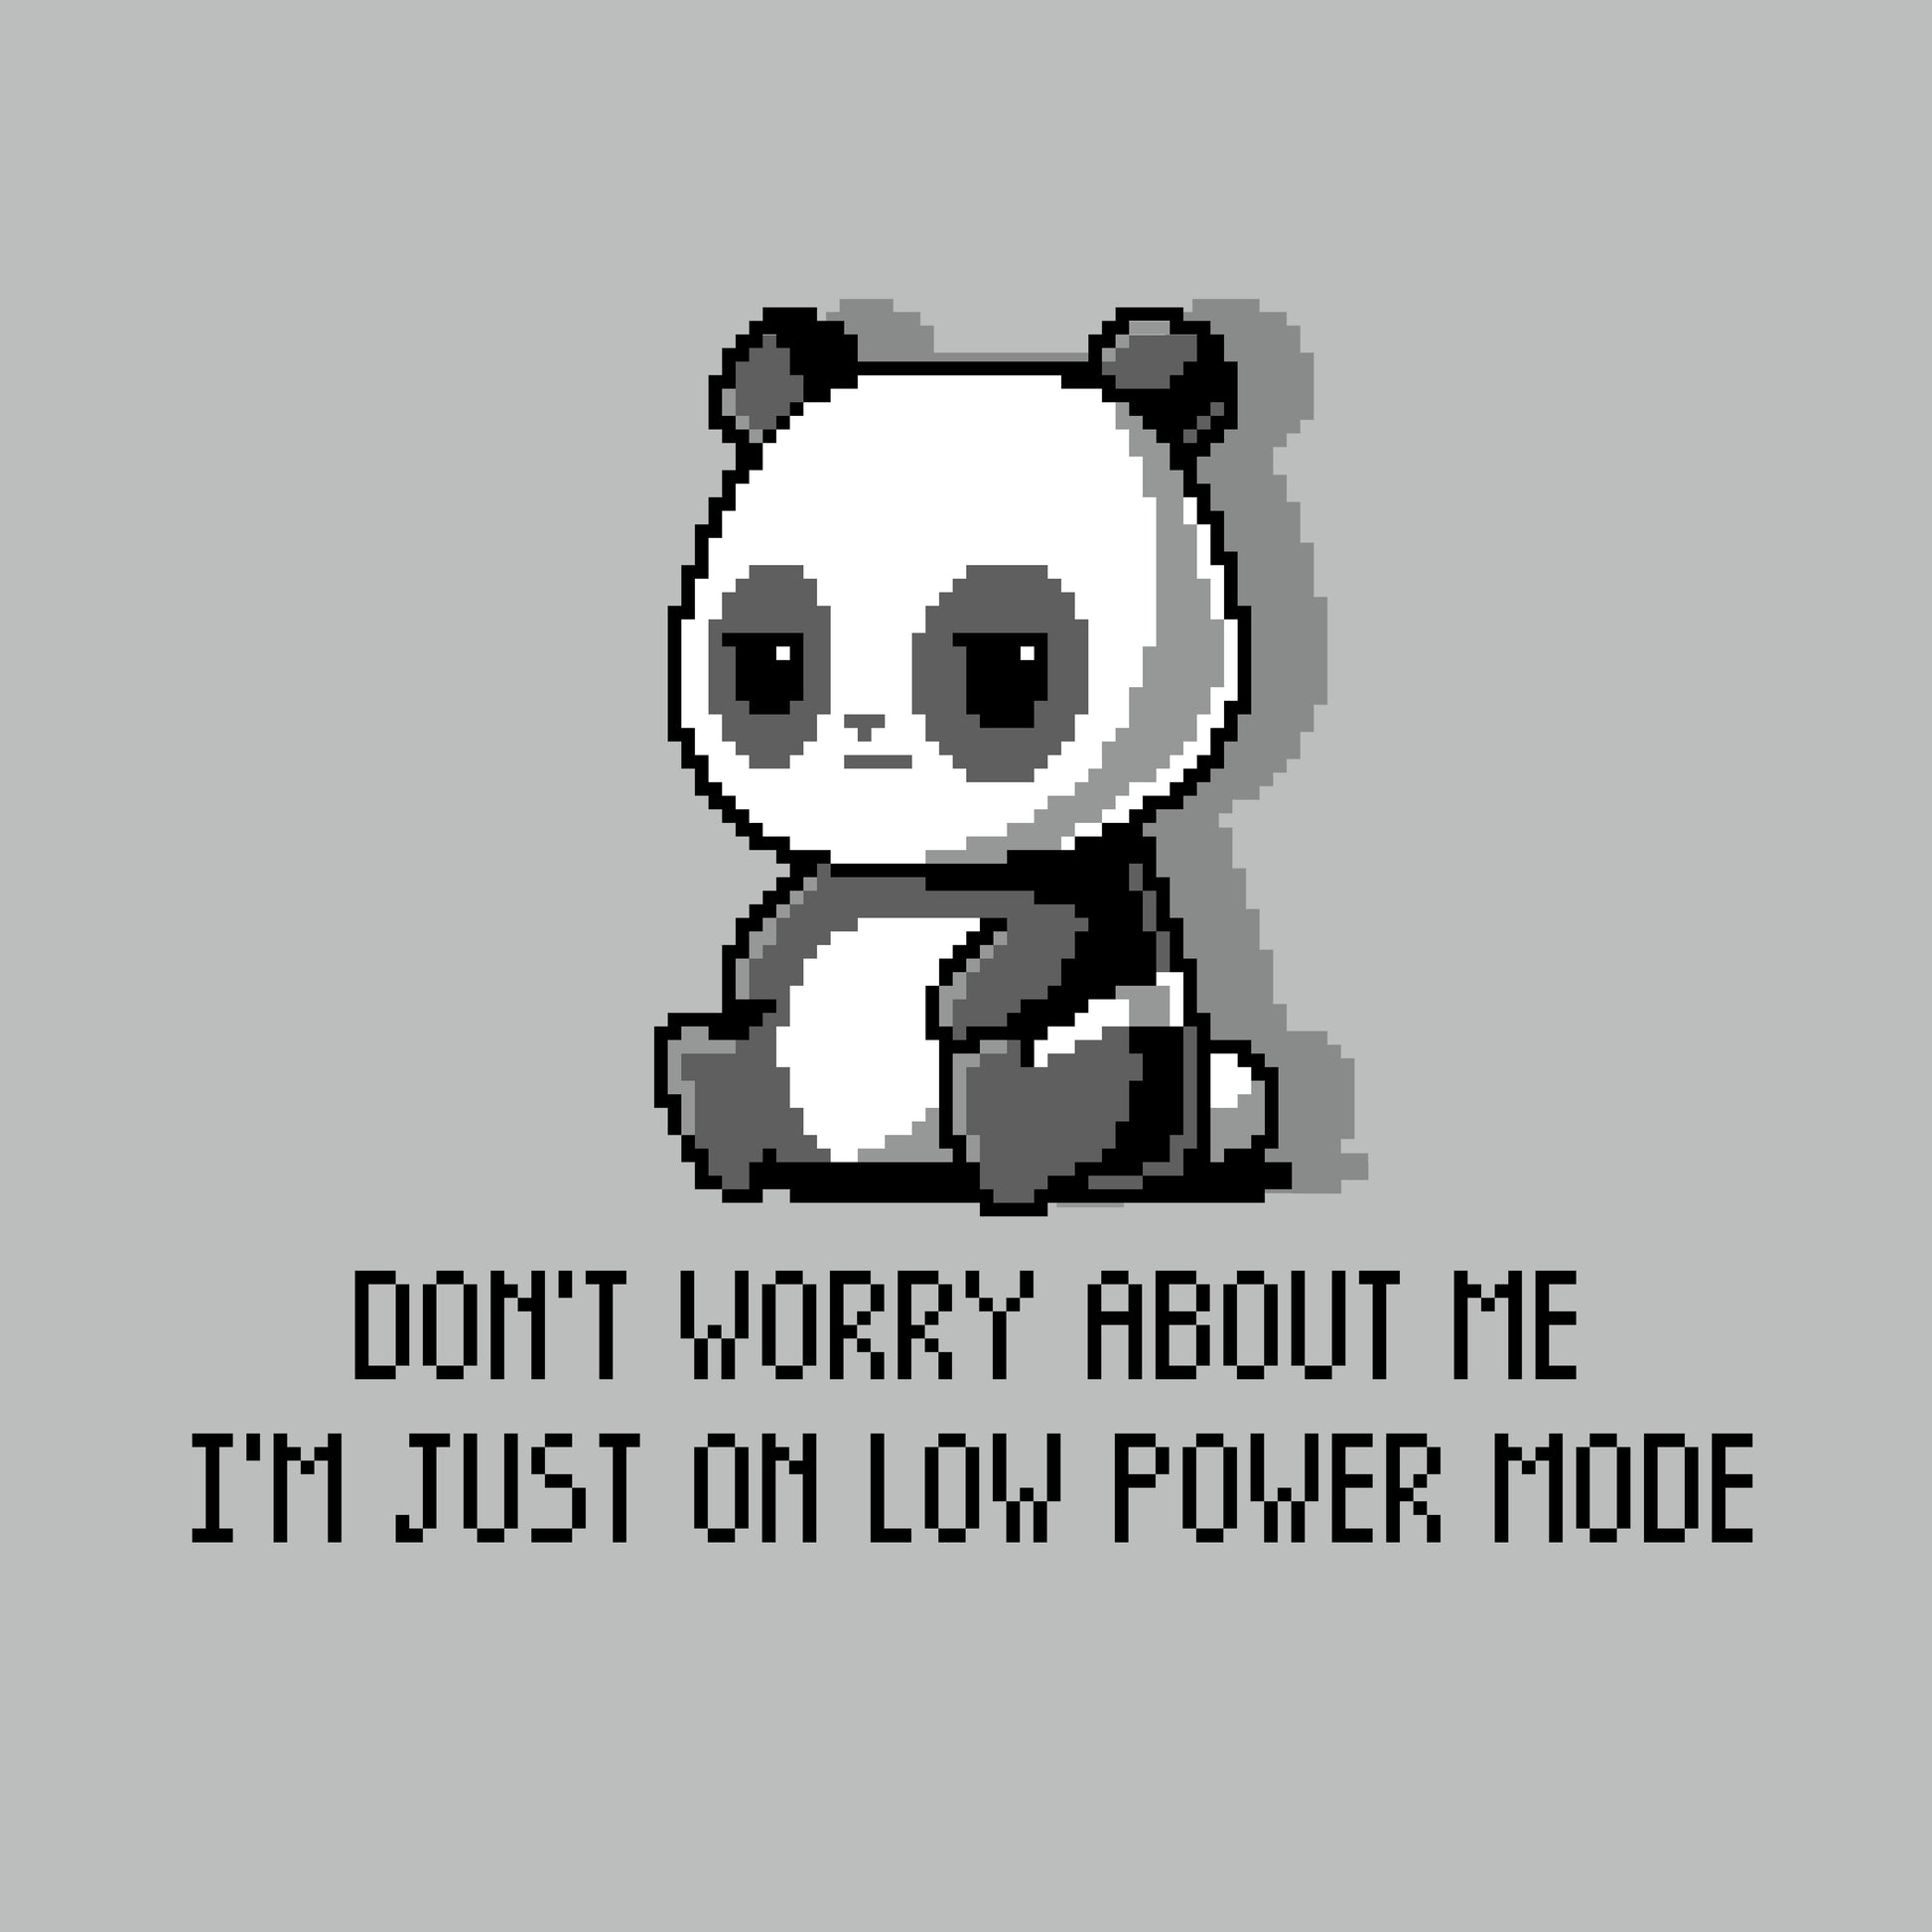 Pixel art of a panda sitting with the text "Don't worry about me, I'm just on low power mode" in a playful, retro style on a super soft ringspun cotton unisex tee called "Low Power Mode" by monsterdigital.